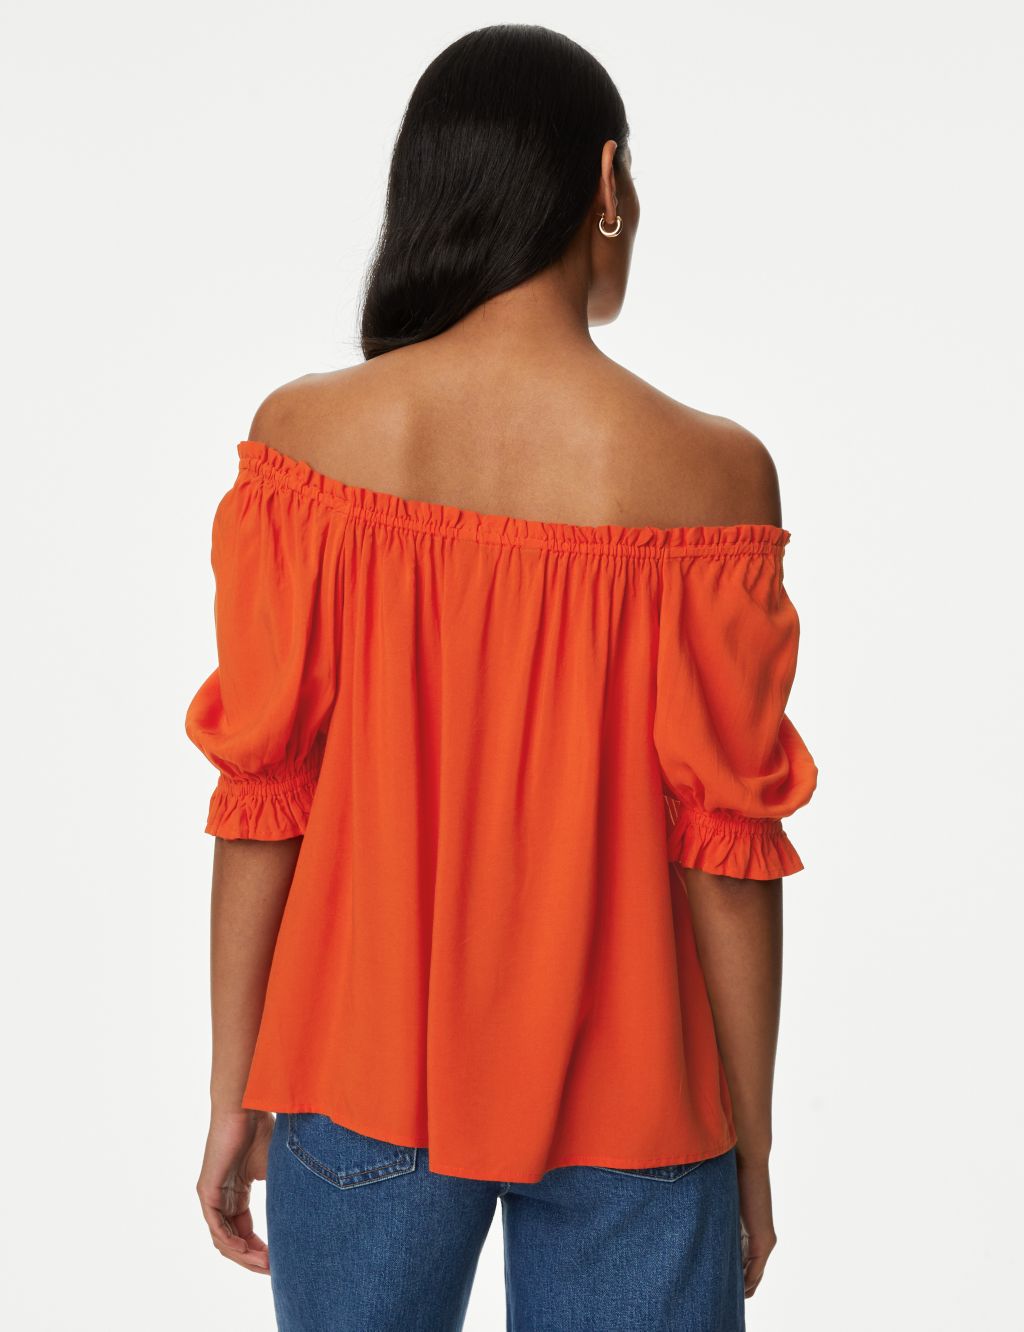 Square Neck Puff Sleeve Top image 4